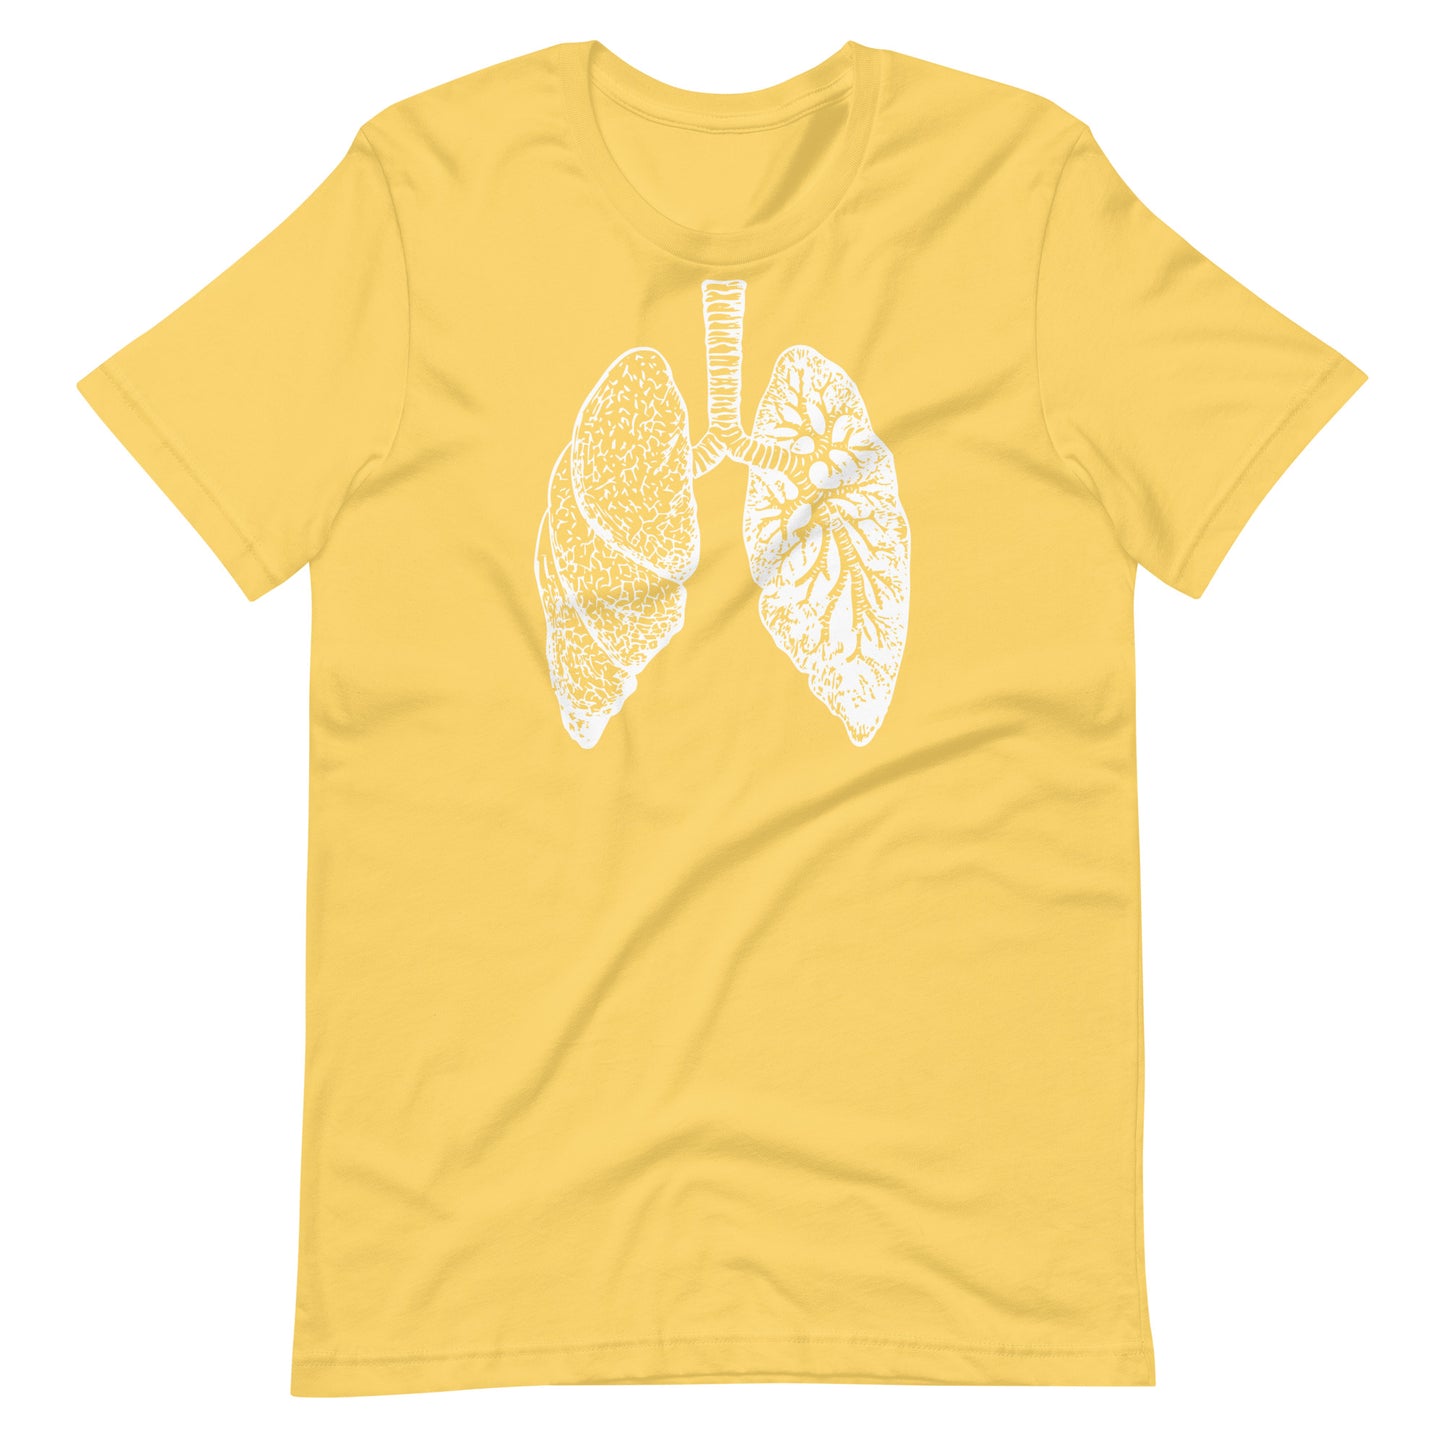 Graphic Tee, Lungs, Pulmonary, Funny Doctor Shirt, Medical Student, Funny Nurse Shirt, Funny Resident Shirt, Doctor, Physician, Resident, Nurse, PA, NP, Medical Student, Asthma, Pulmonary Fibrosis, Lung Cancer, Cystic Fibrosis